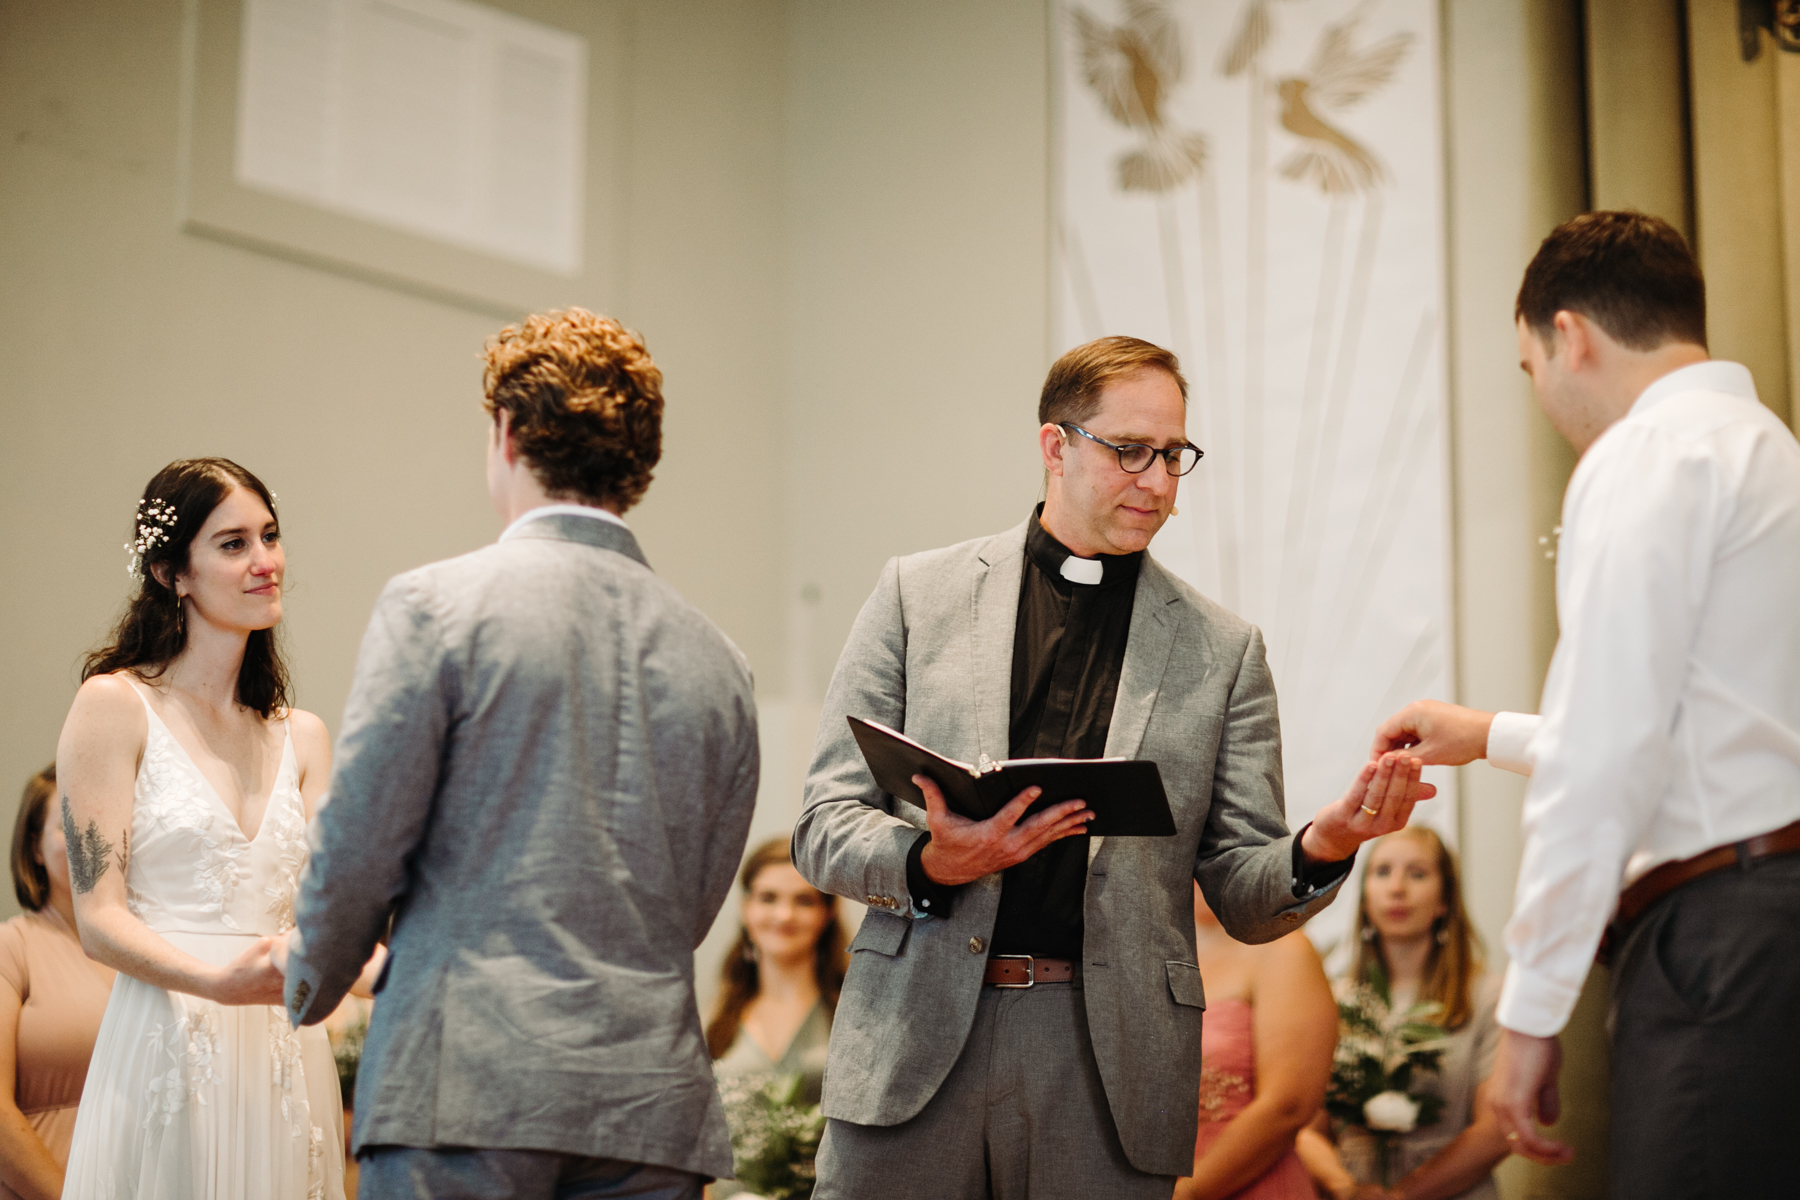 Pastor giving the rings during a downtown knoxville wedding at redeemer church